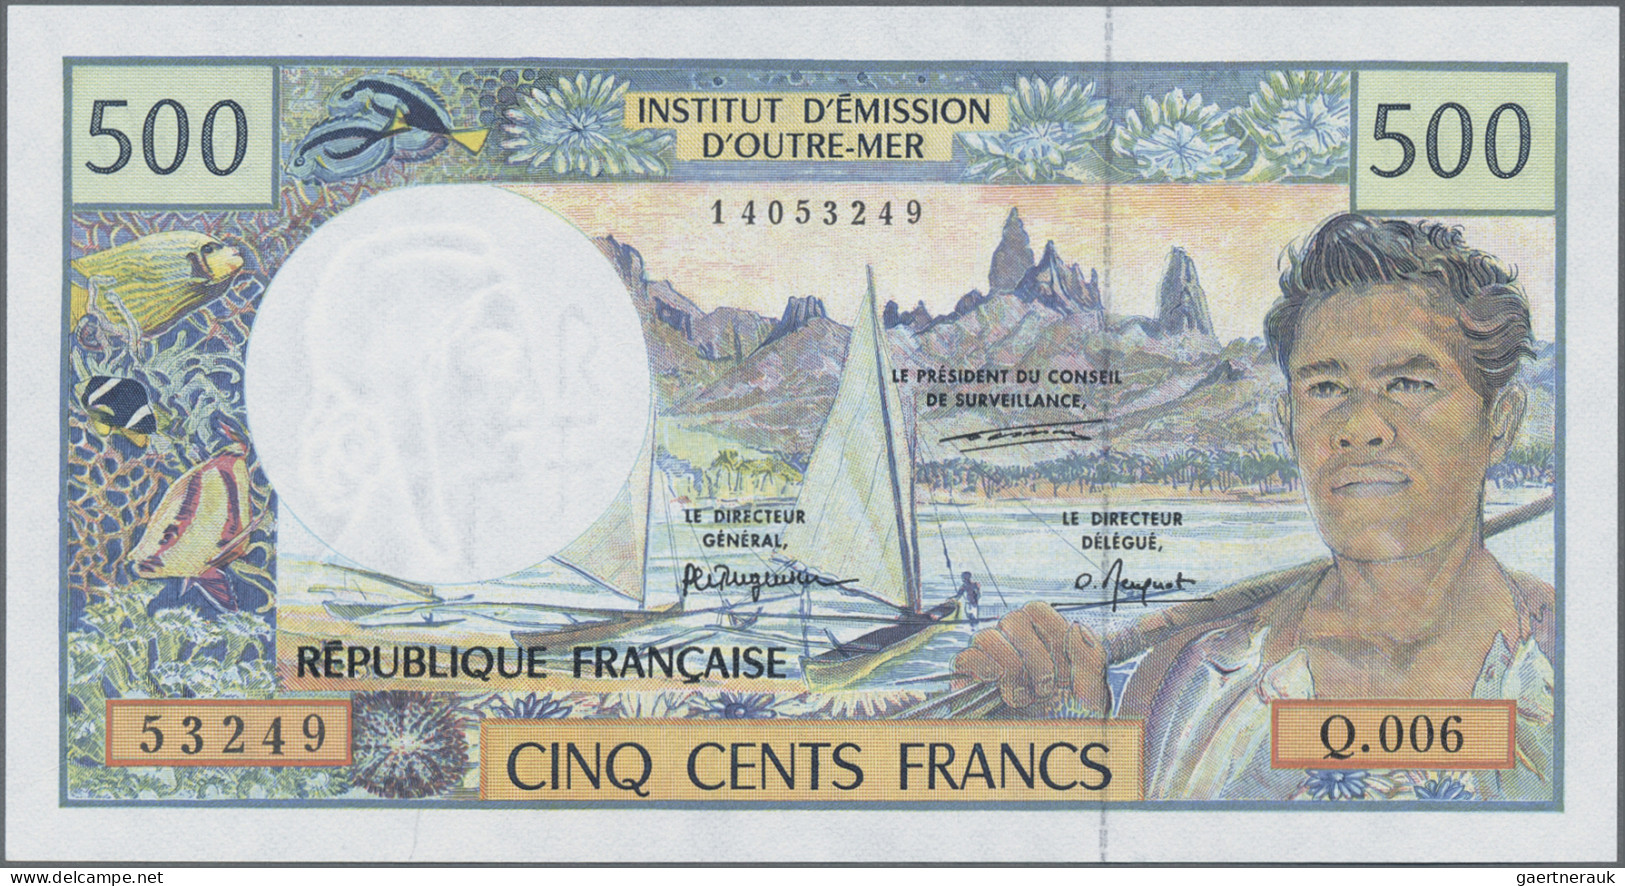 French Pacific Territories: Institut d'Émission d'Outre-Mer, lot with 6 banknote